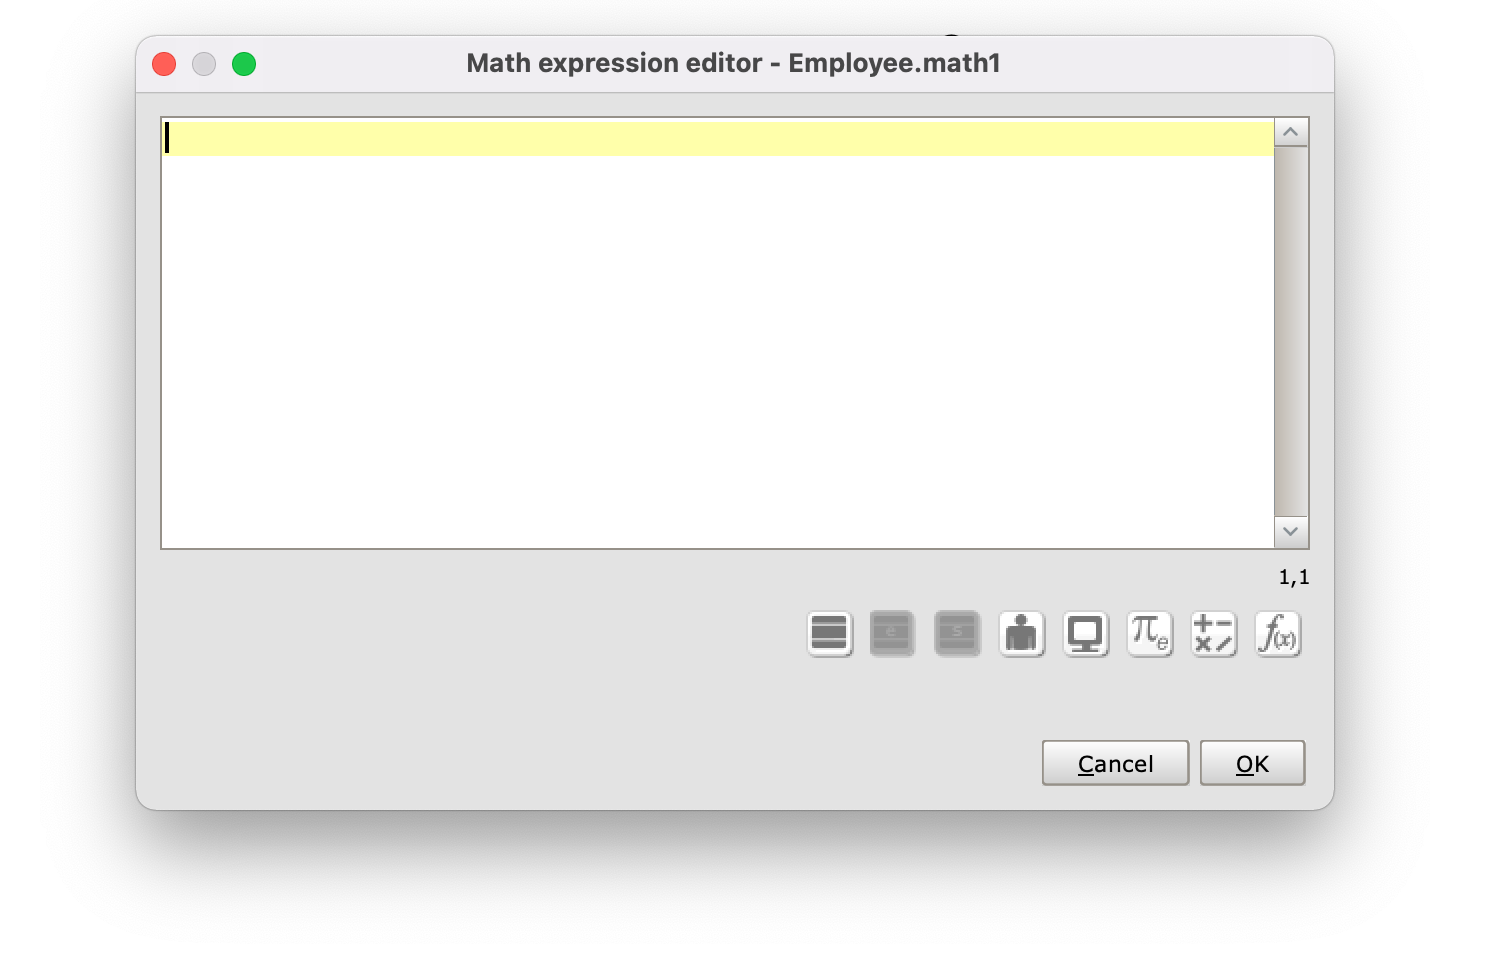 The Math expression editor